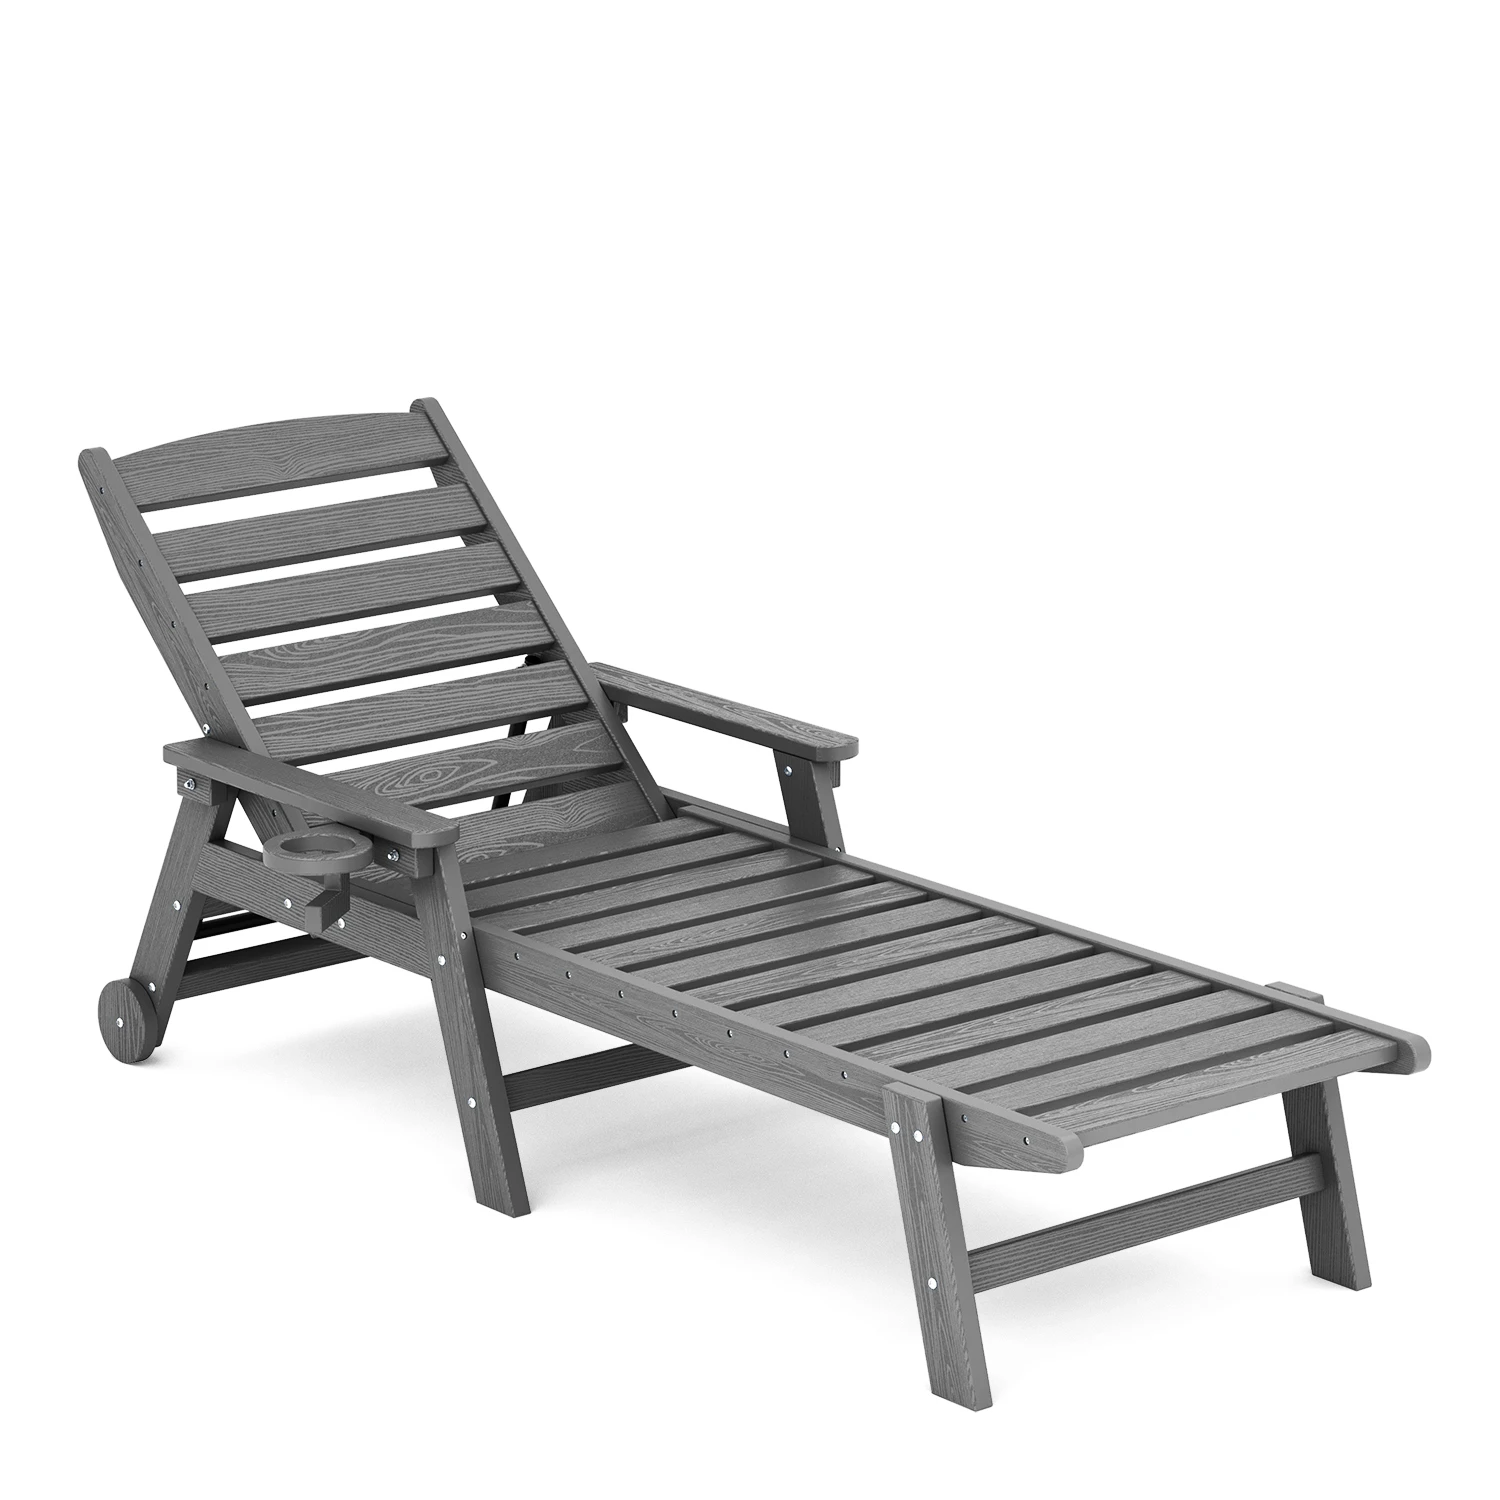 COASTLINE Chaise with Arms & Wheels in Dark Gray